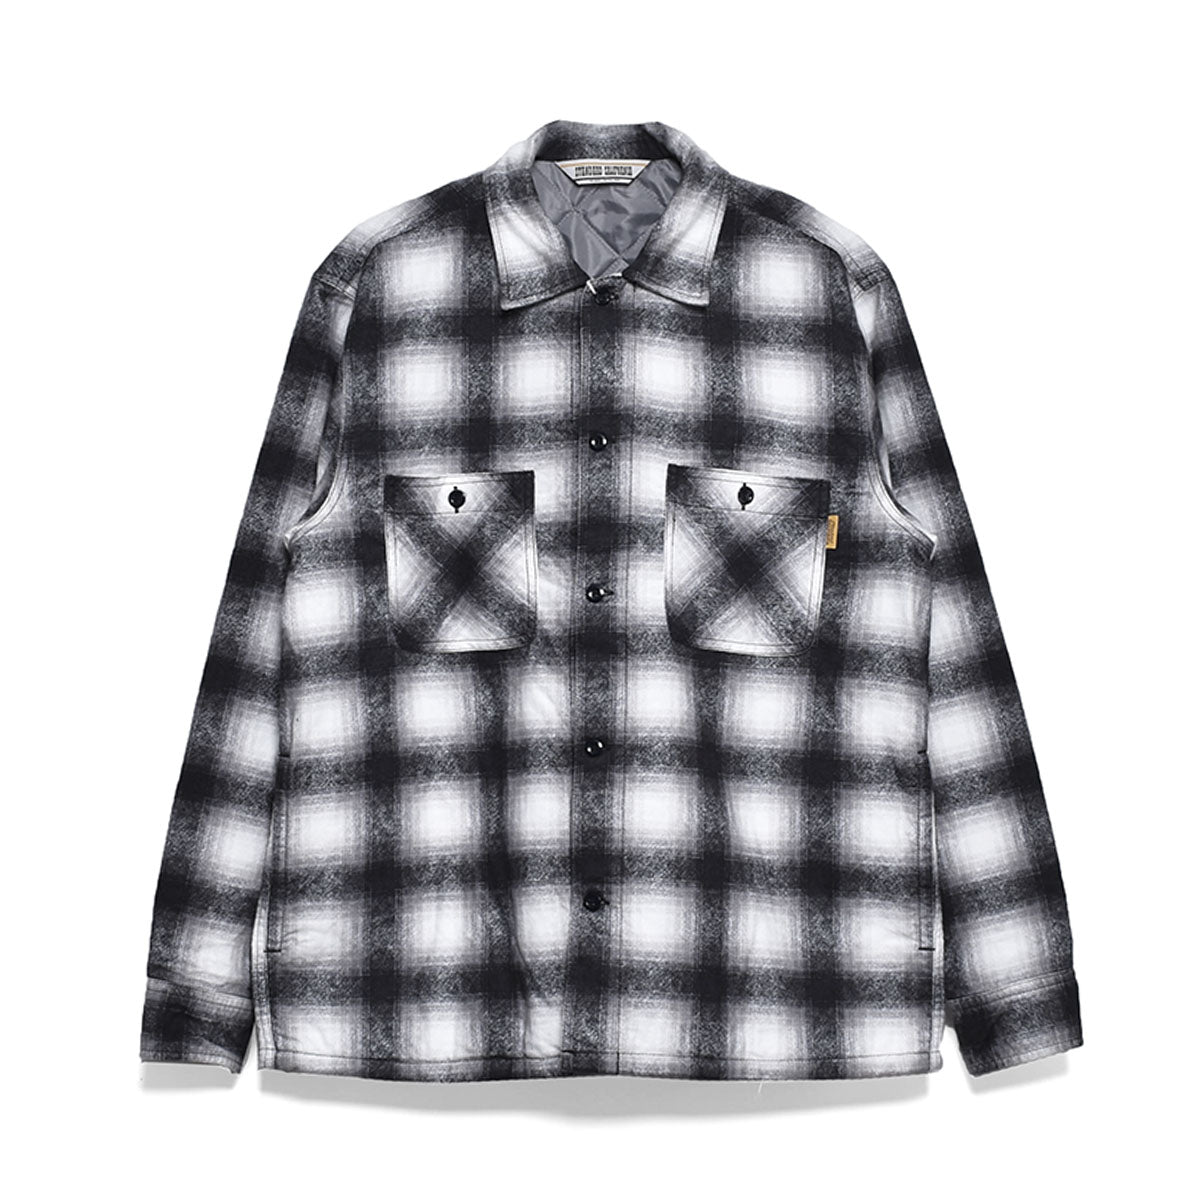 STANDARD CALIFORNIA]SD Quilted Print Flannel Check Shirt Jacket